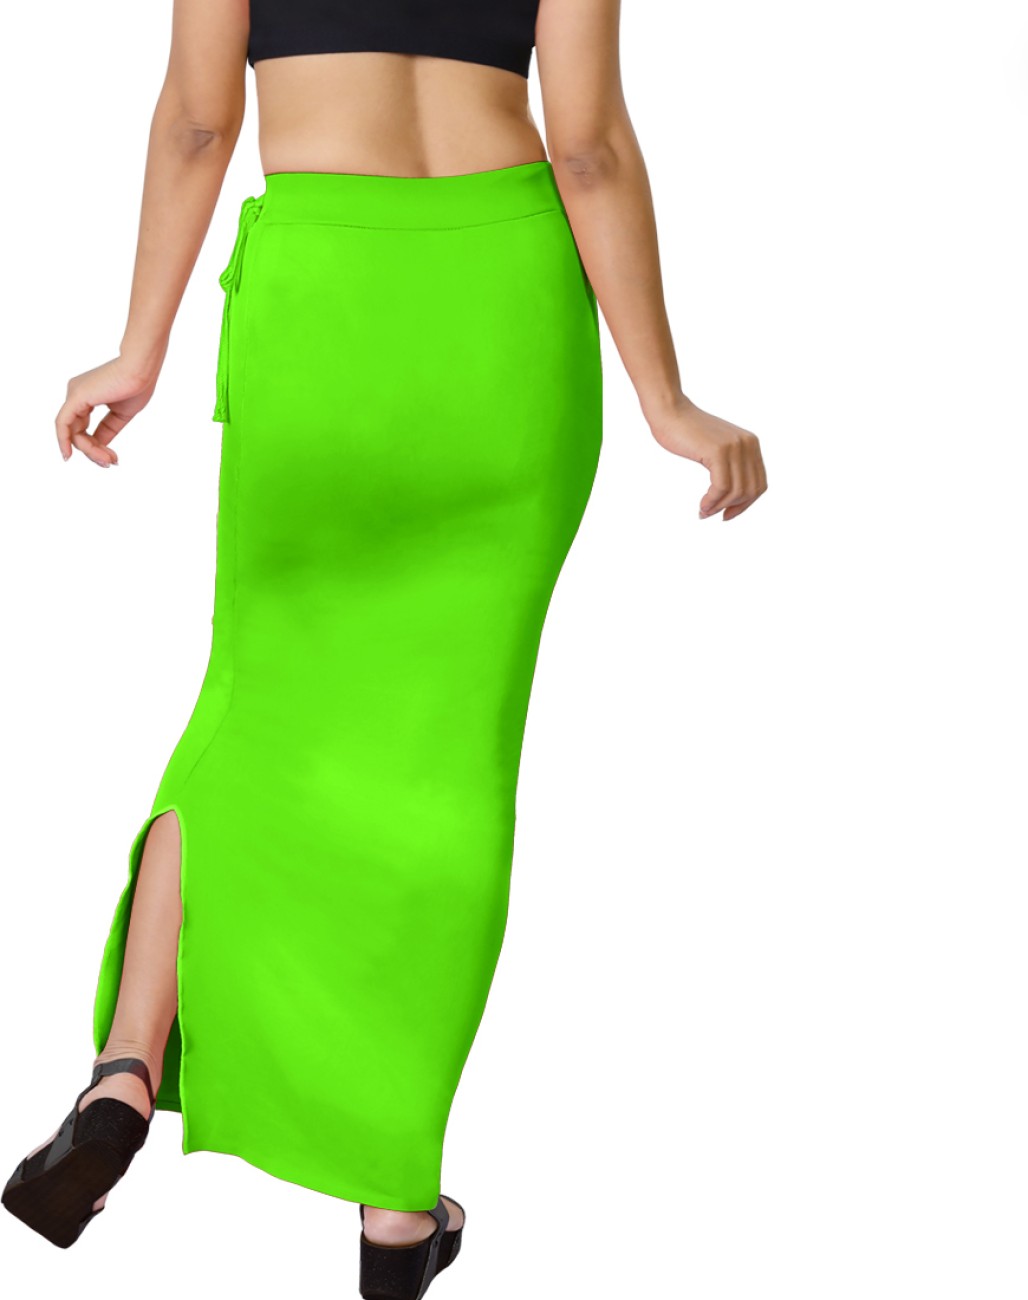 dermawear Saree Shapewear Everyday SSE407 Neon Green Polyester Petticoat  Price in India - Buy dermawear Saree Shapewear Everyday SSE407 Neon Green  Polyester Petticoat online at